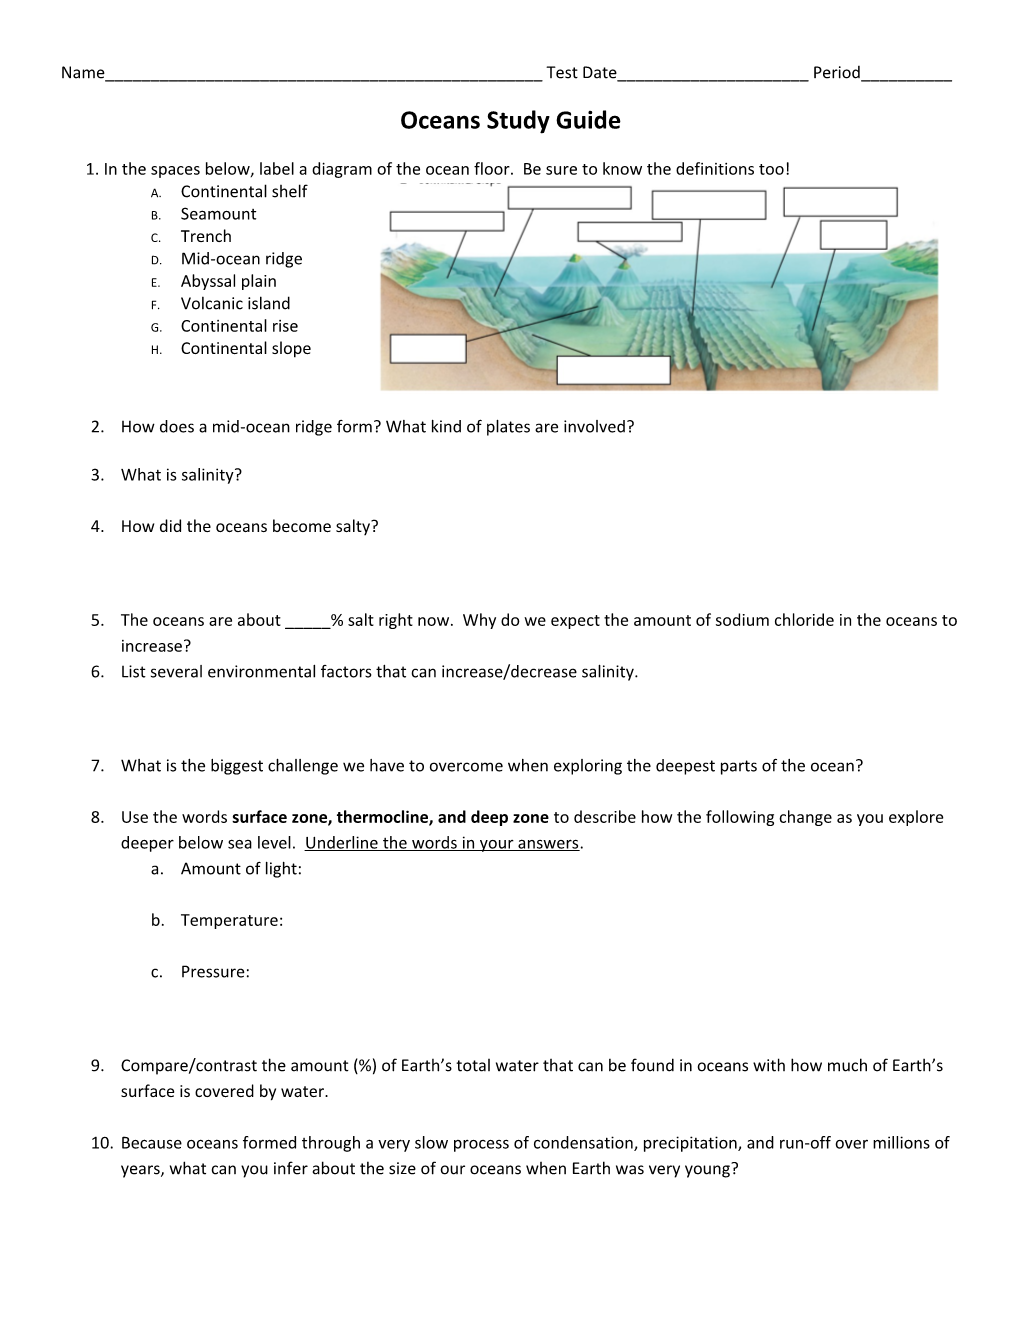 Oceans Study Guide